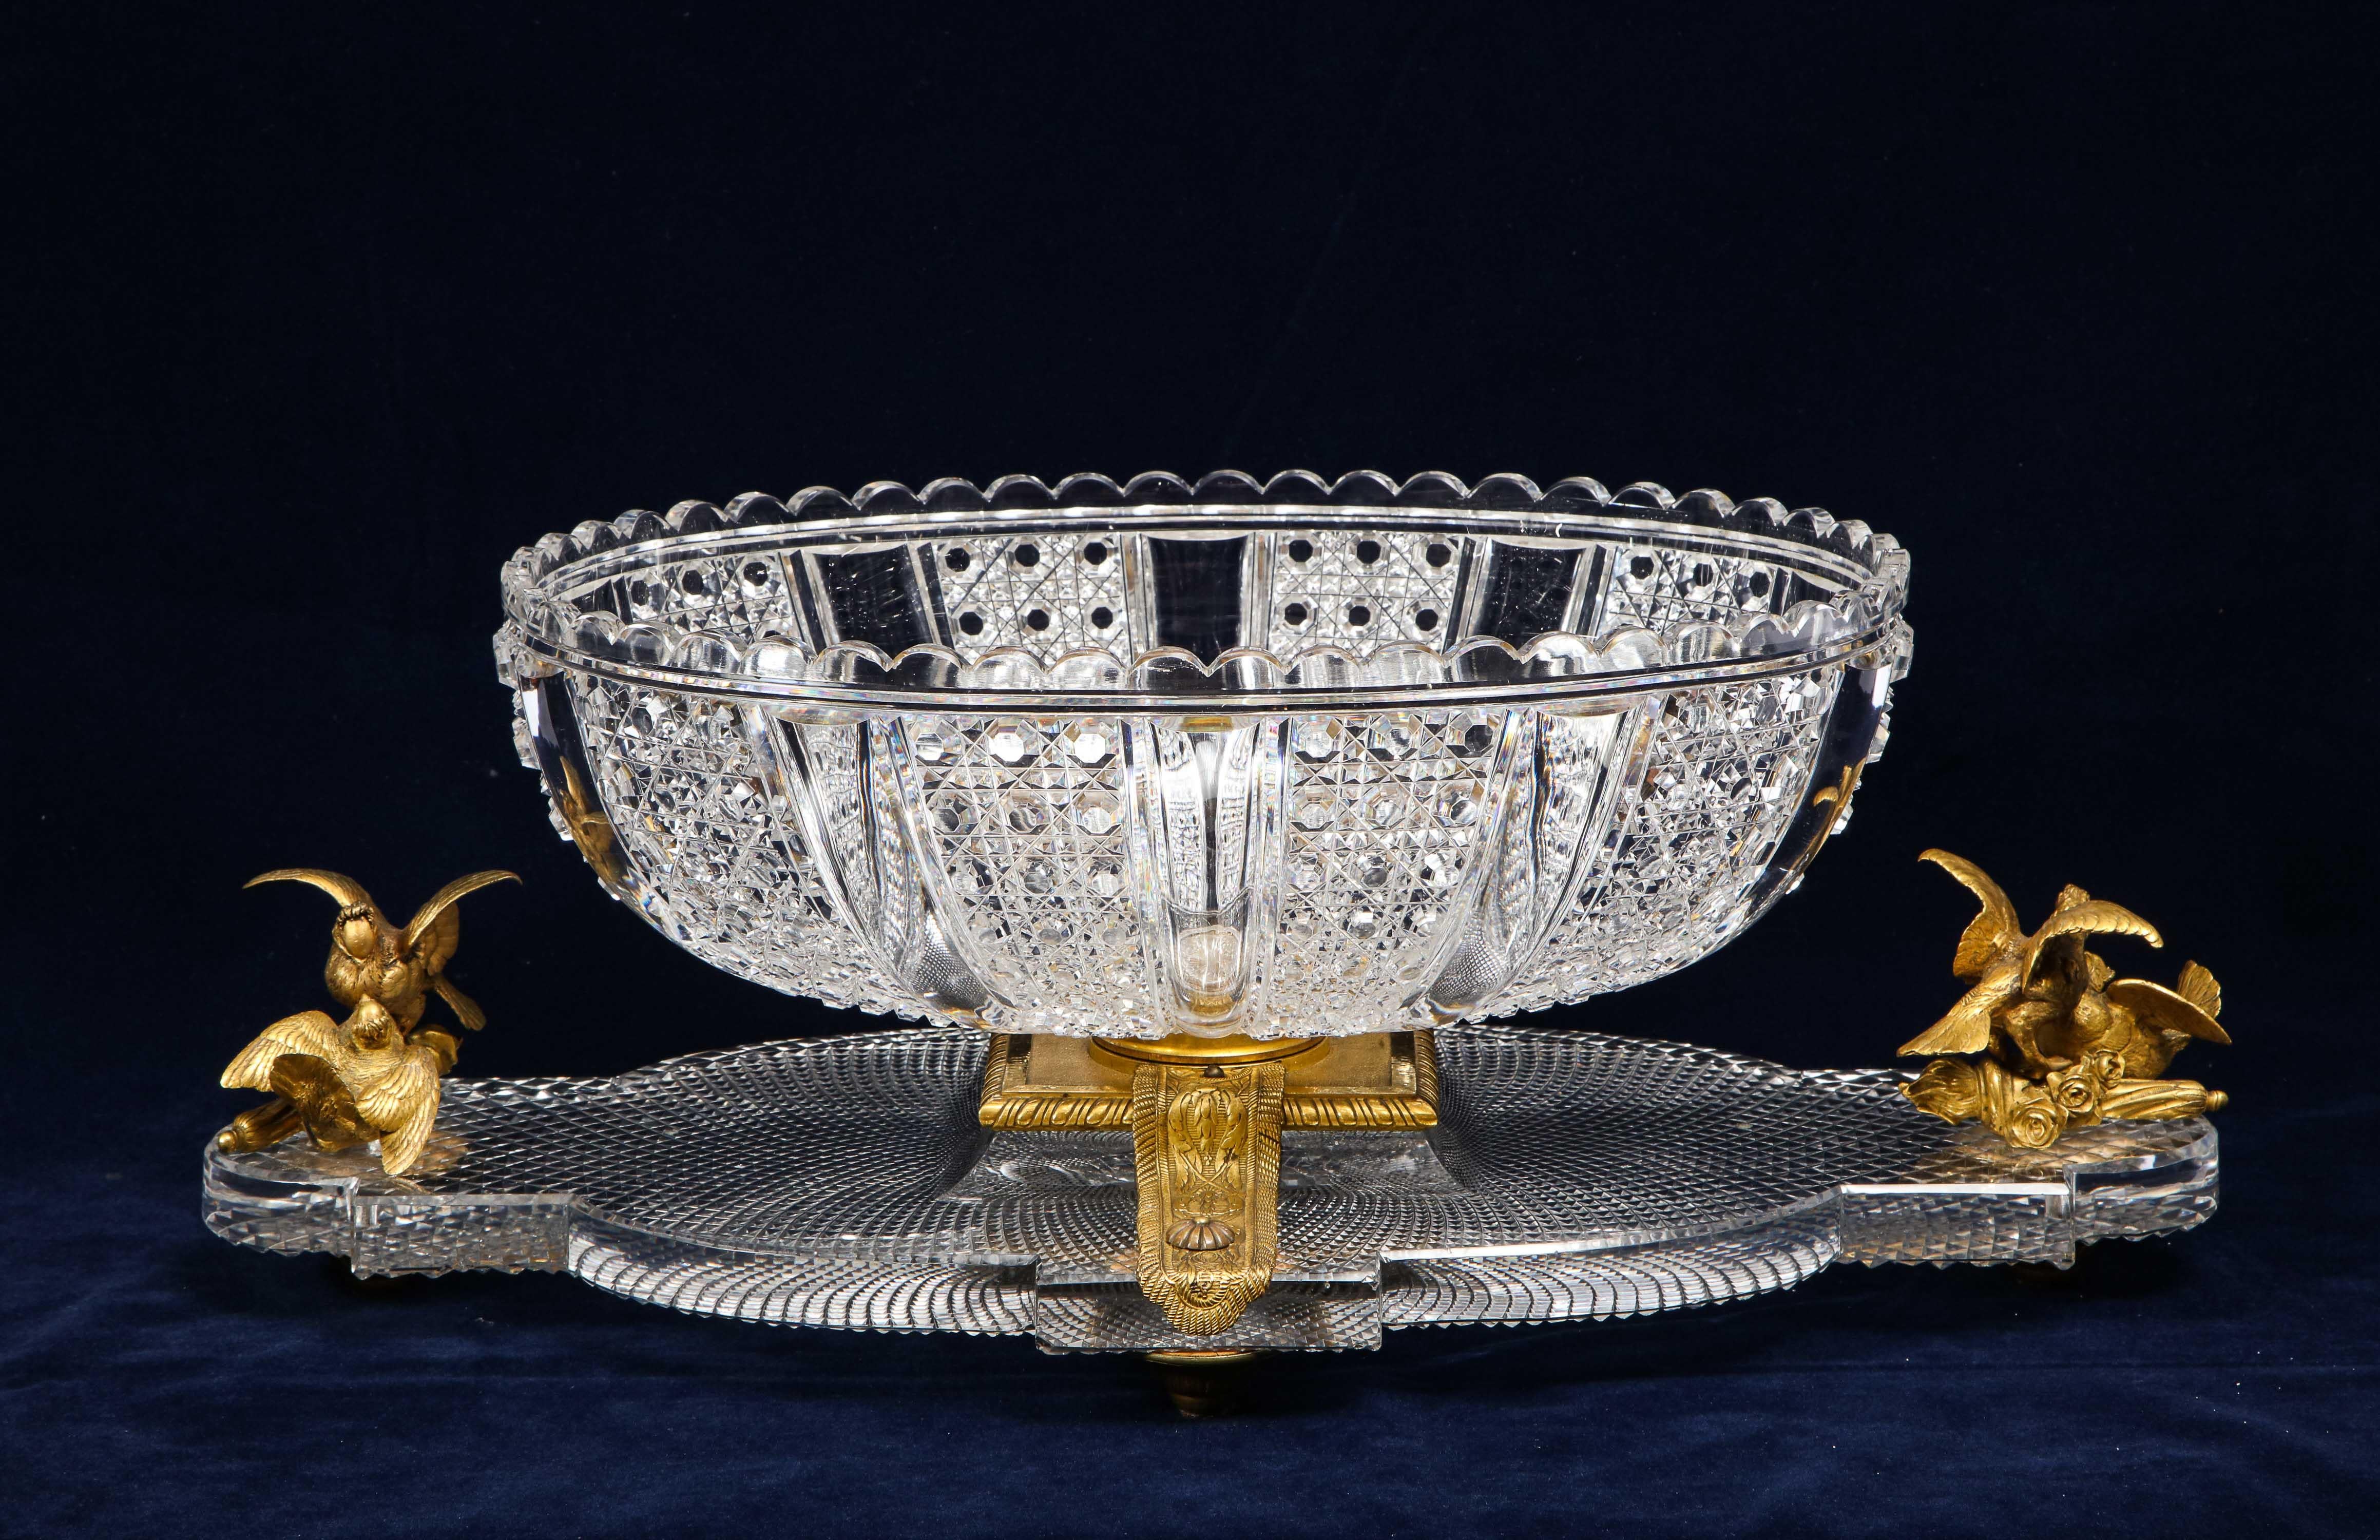 A magnificent museum quality French 19th century hand-diamond cut crystal and ormolu-mounted Baccarat centerpiece/surtout de table in the Louis XVI style. This is truly an exemplary piece. The crystal center bowl is all hand-diamond cut with